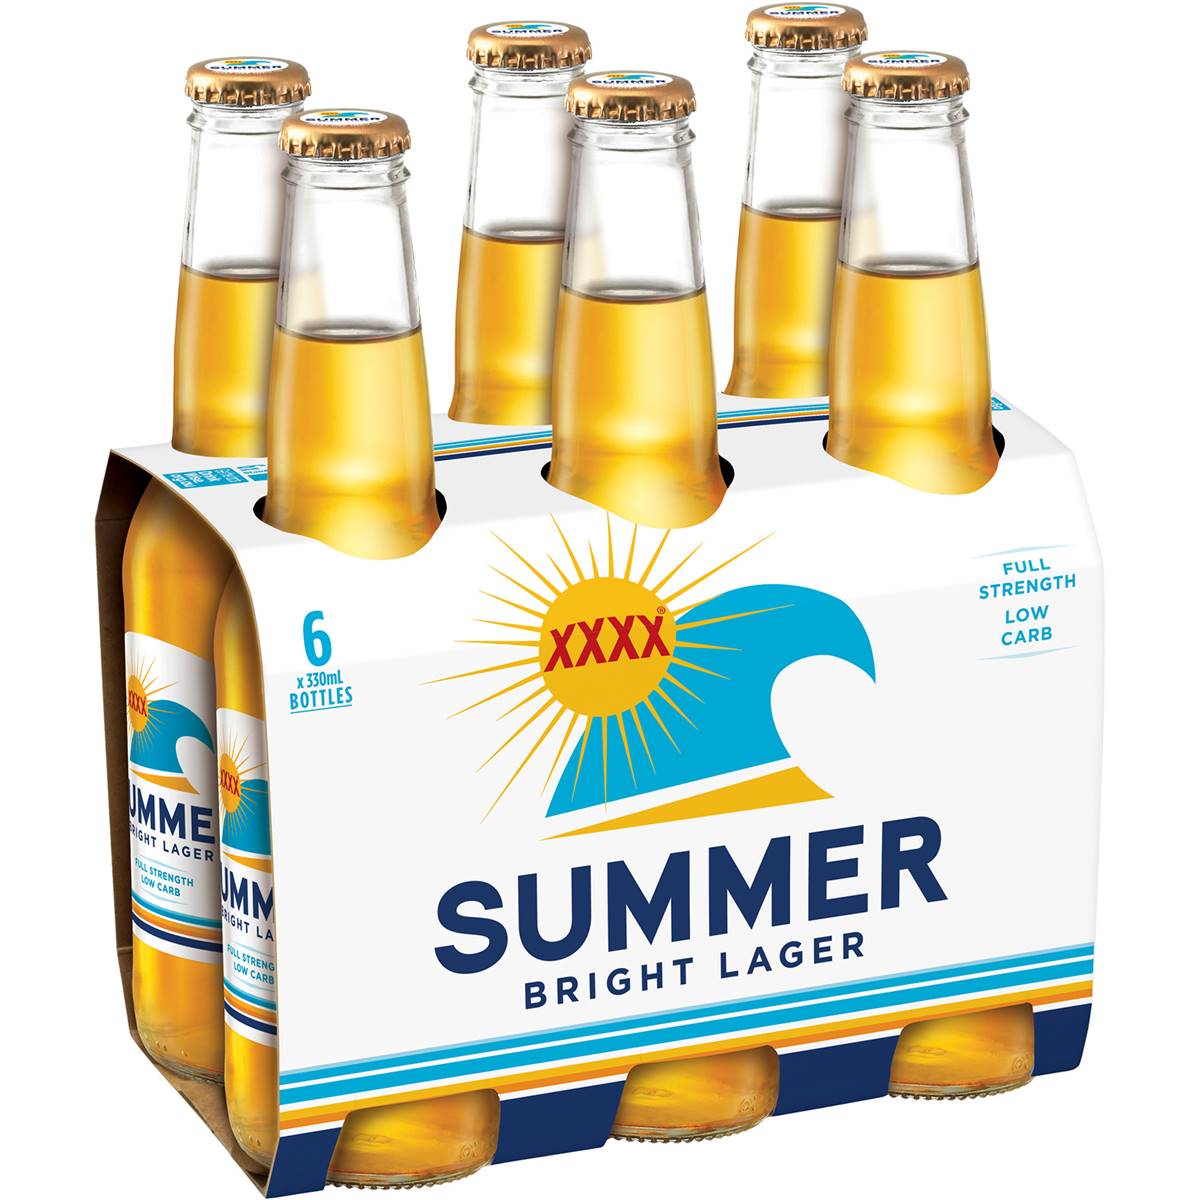 Calories in Xxxx Summer Bright Lager Low Carb Bottles